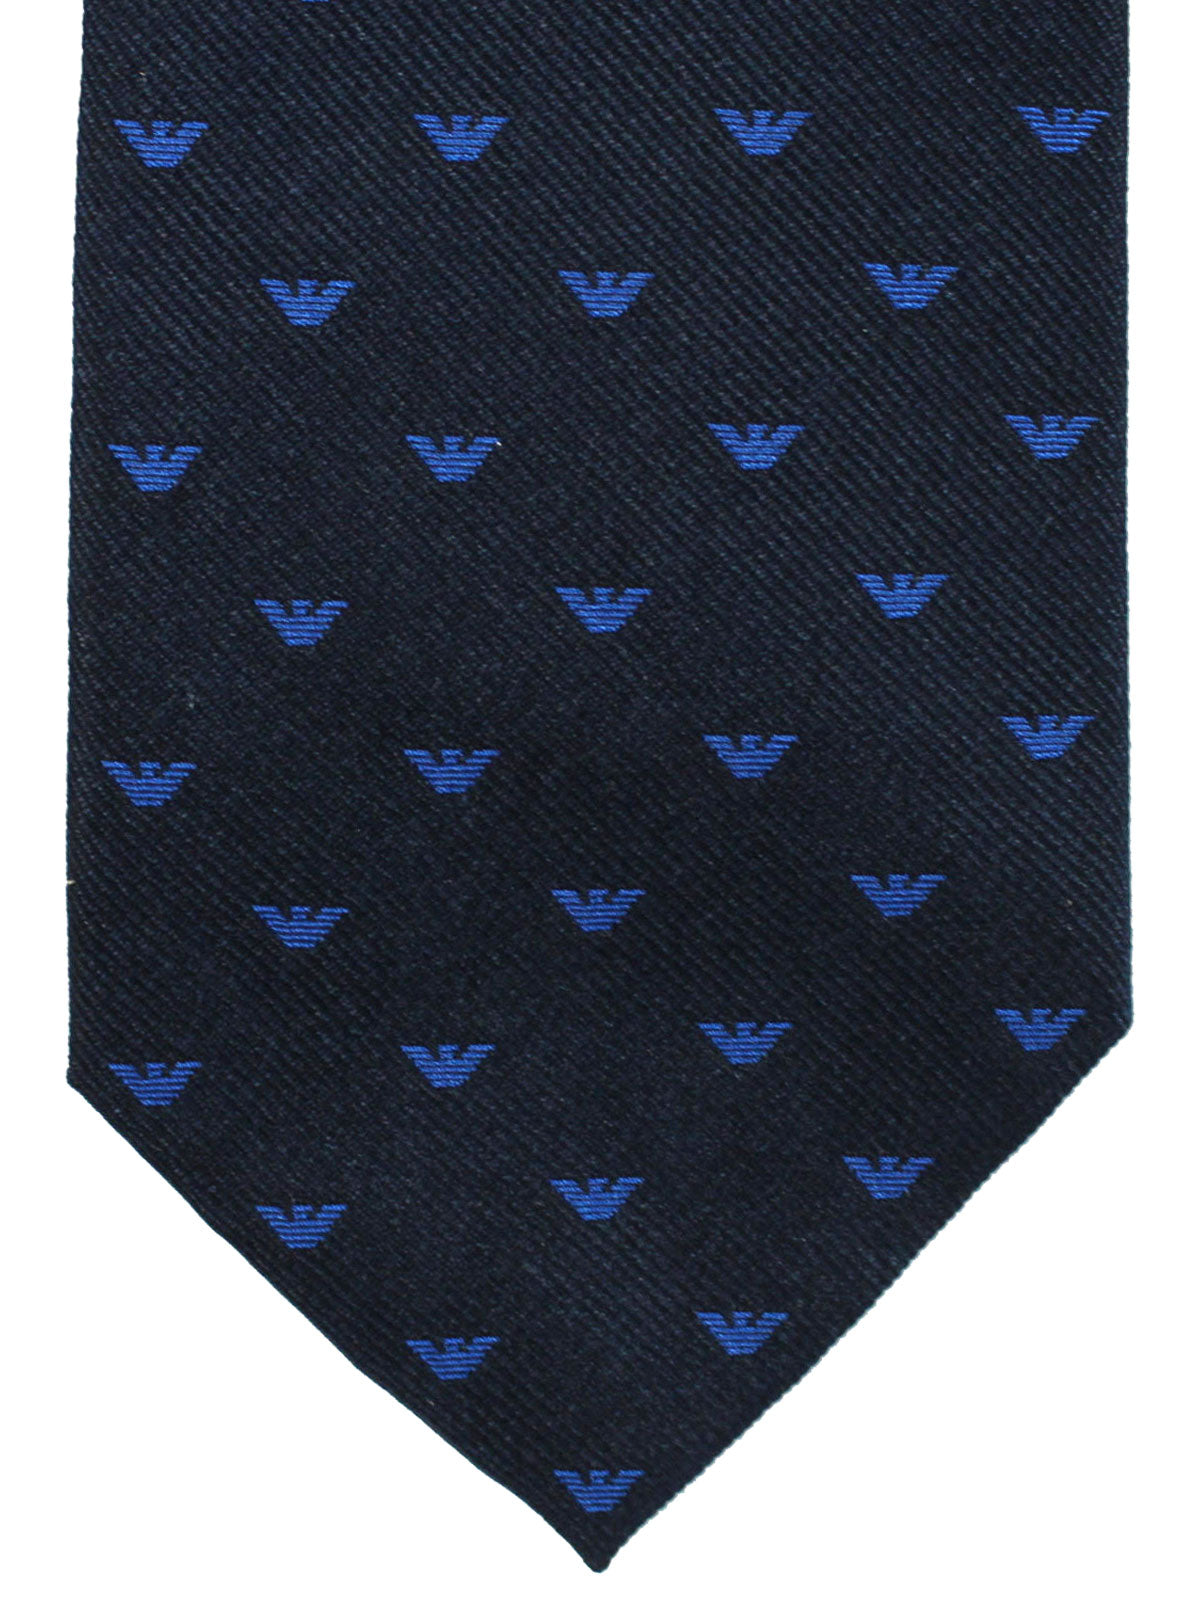 Louis Vuitton Silk Patterned Tie - Blue Ties, Suiting Accessories